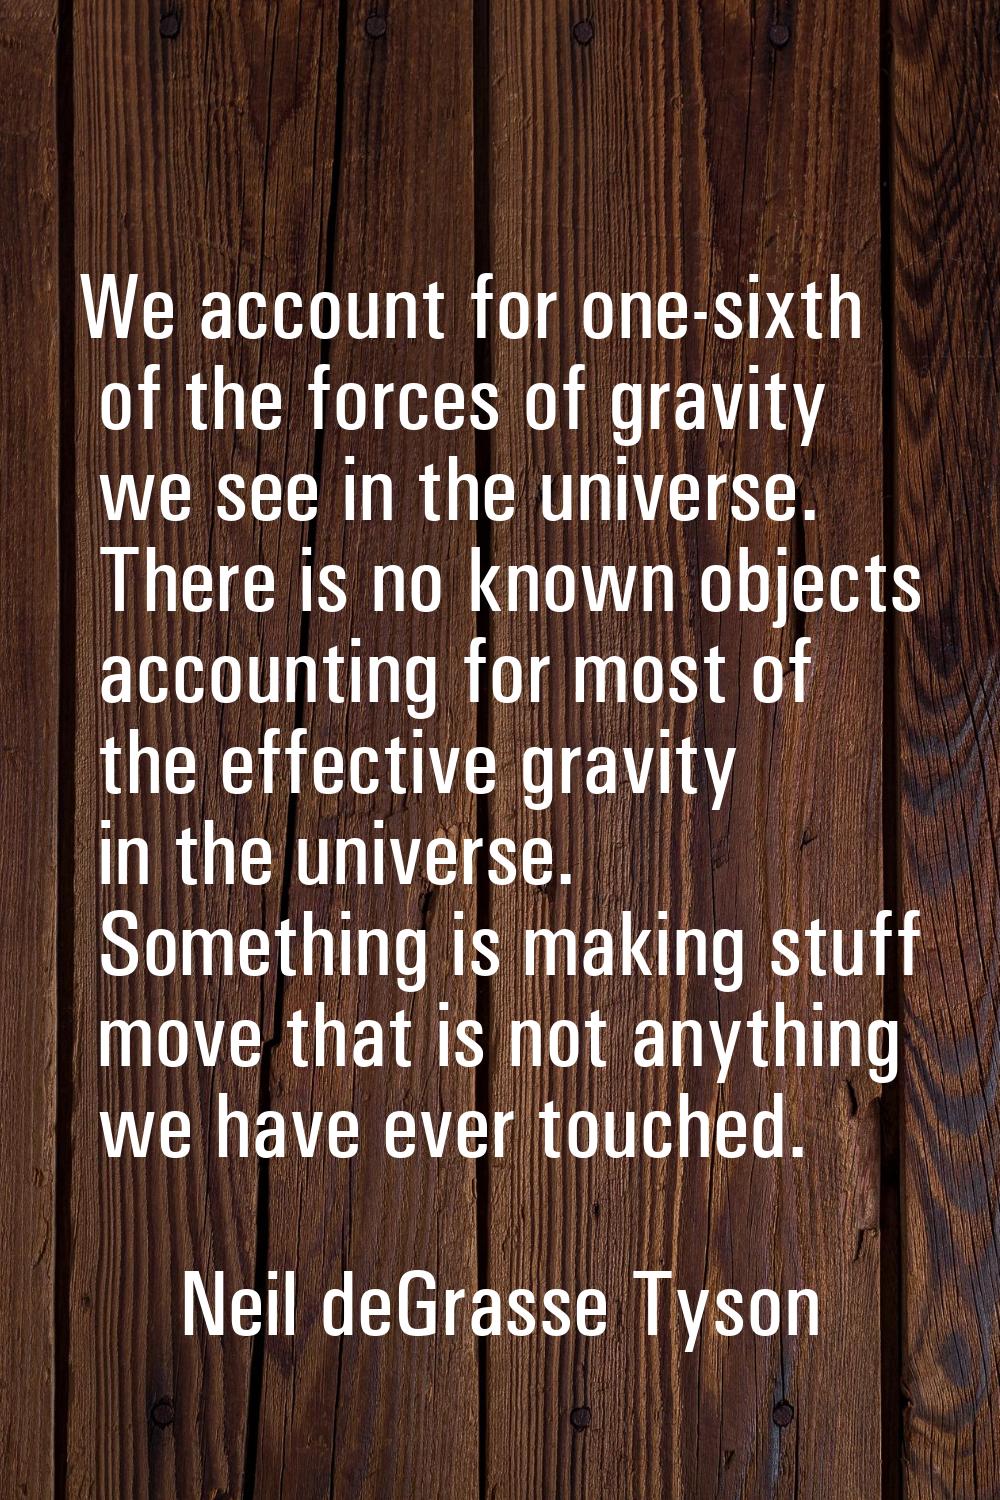 We account for one-sixth of the forces of gravity we see in the universe. There is no known objects